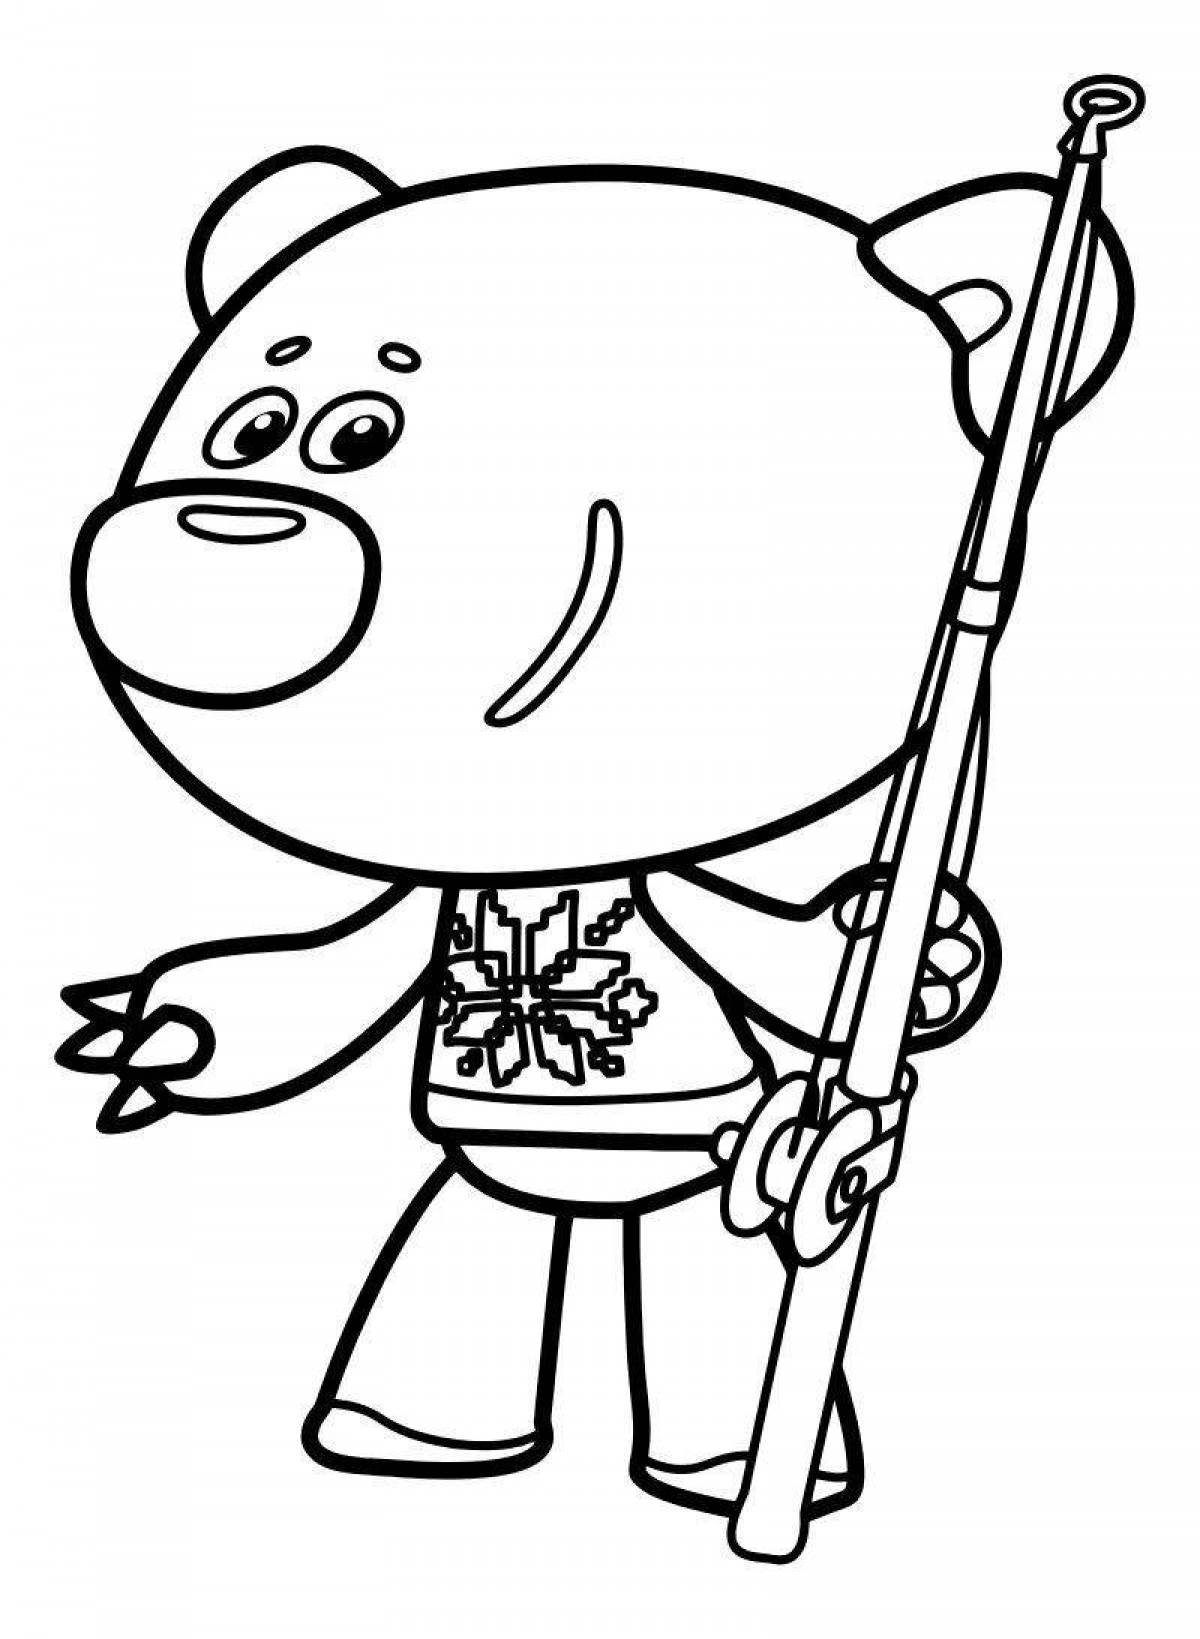 Fluffy bear coloring pages for kids